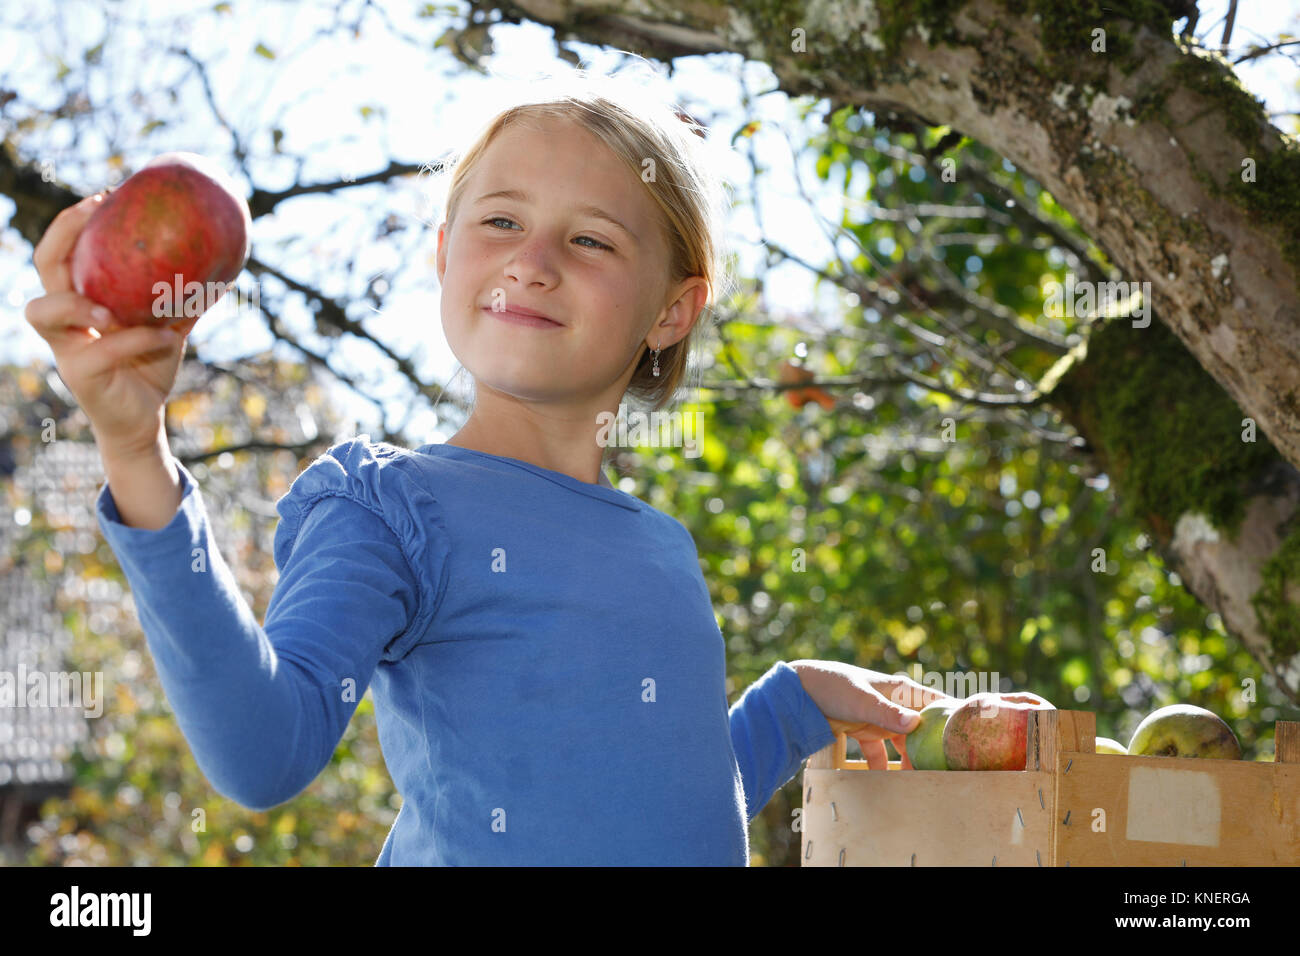 Young girl picking apples from tree Stock Photo